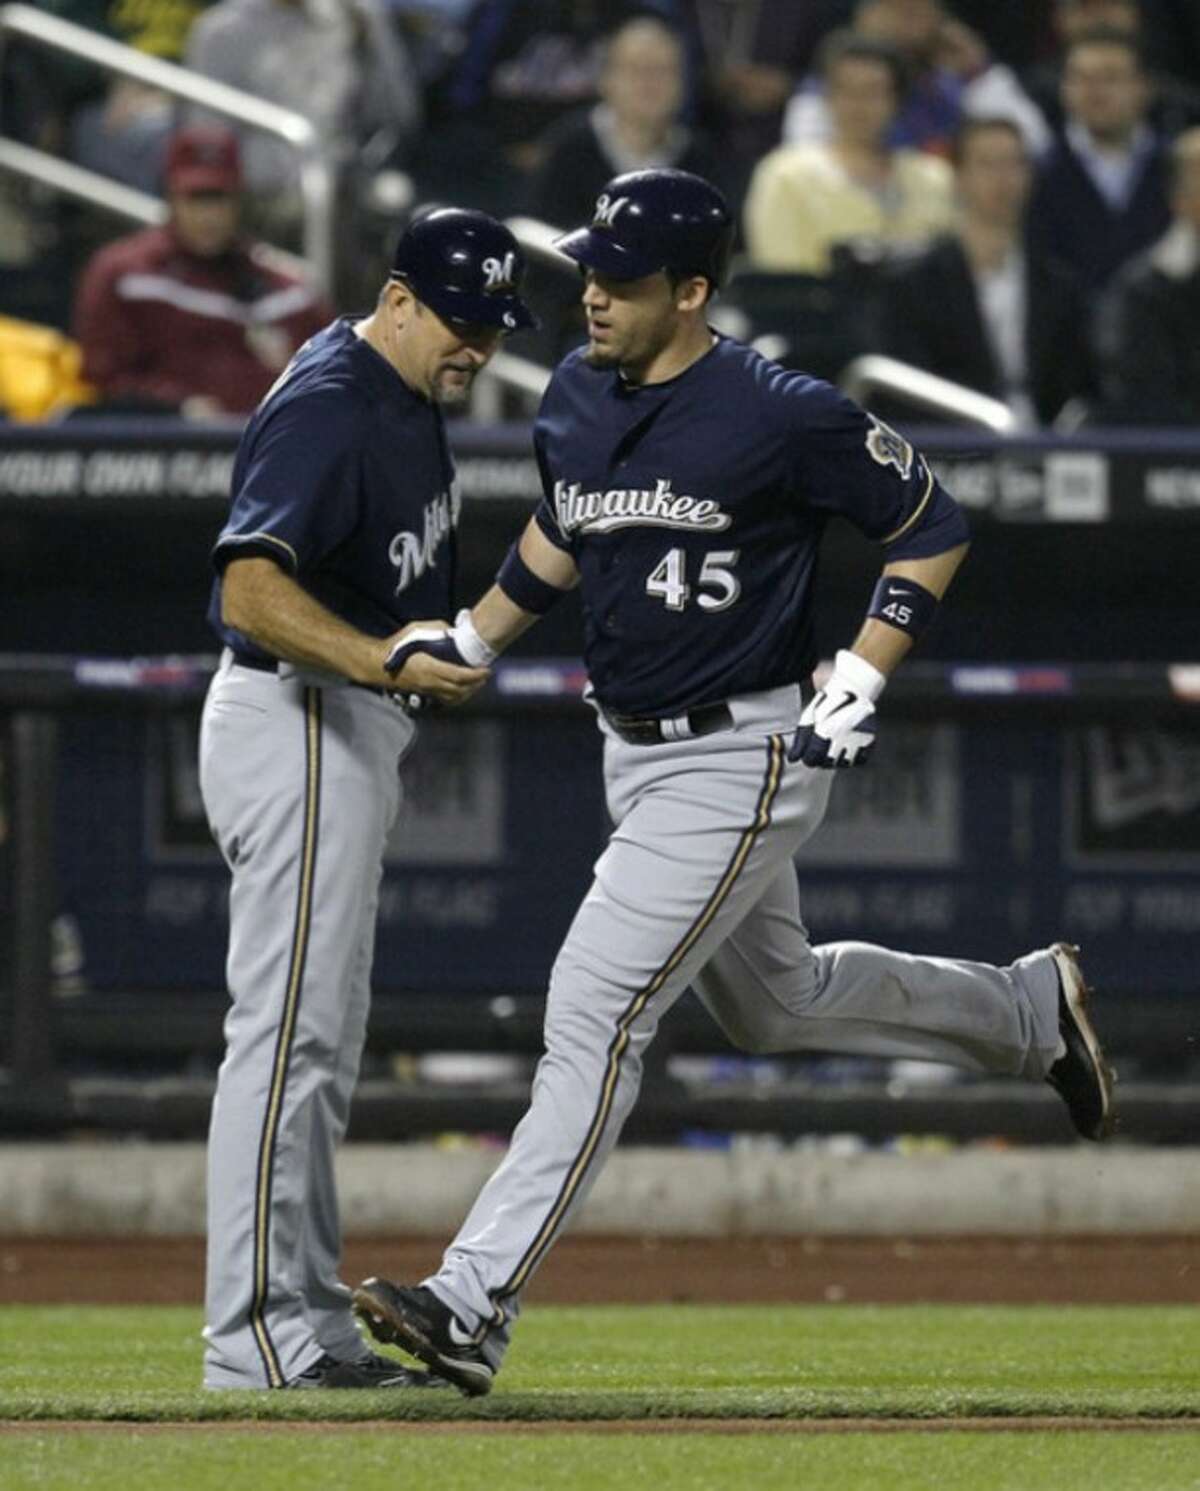 Milwaukee Brewers third base coach Ed Sedar congratulates Travis Ishikawa (45) as he rounds the bases on his solo home run off New York Mets pitcher Dillon Gee during the fifth inning of their baseball game at Citi Field in New York, Tuesday, May 15, 2012. (AP Photo/Kathy Willens)